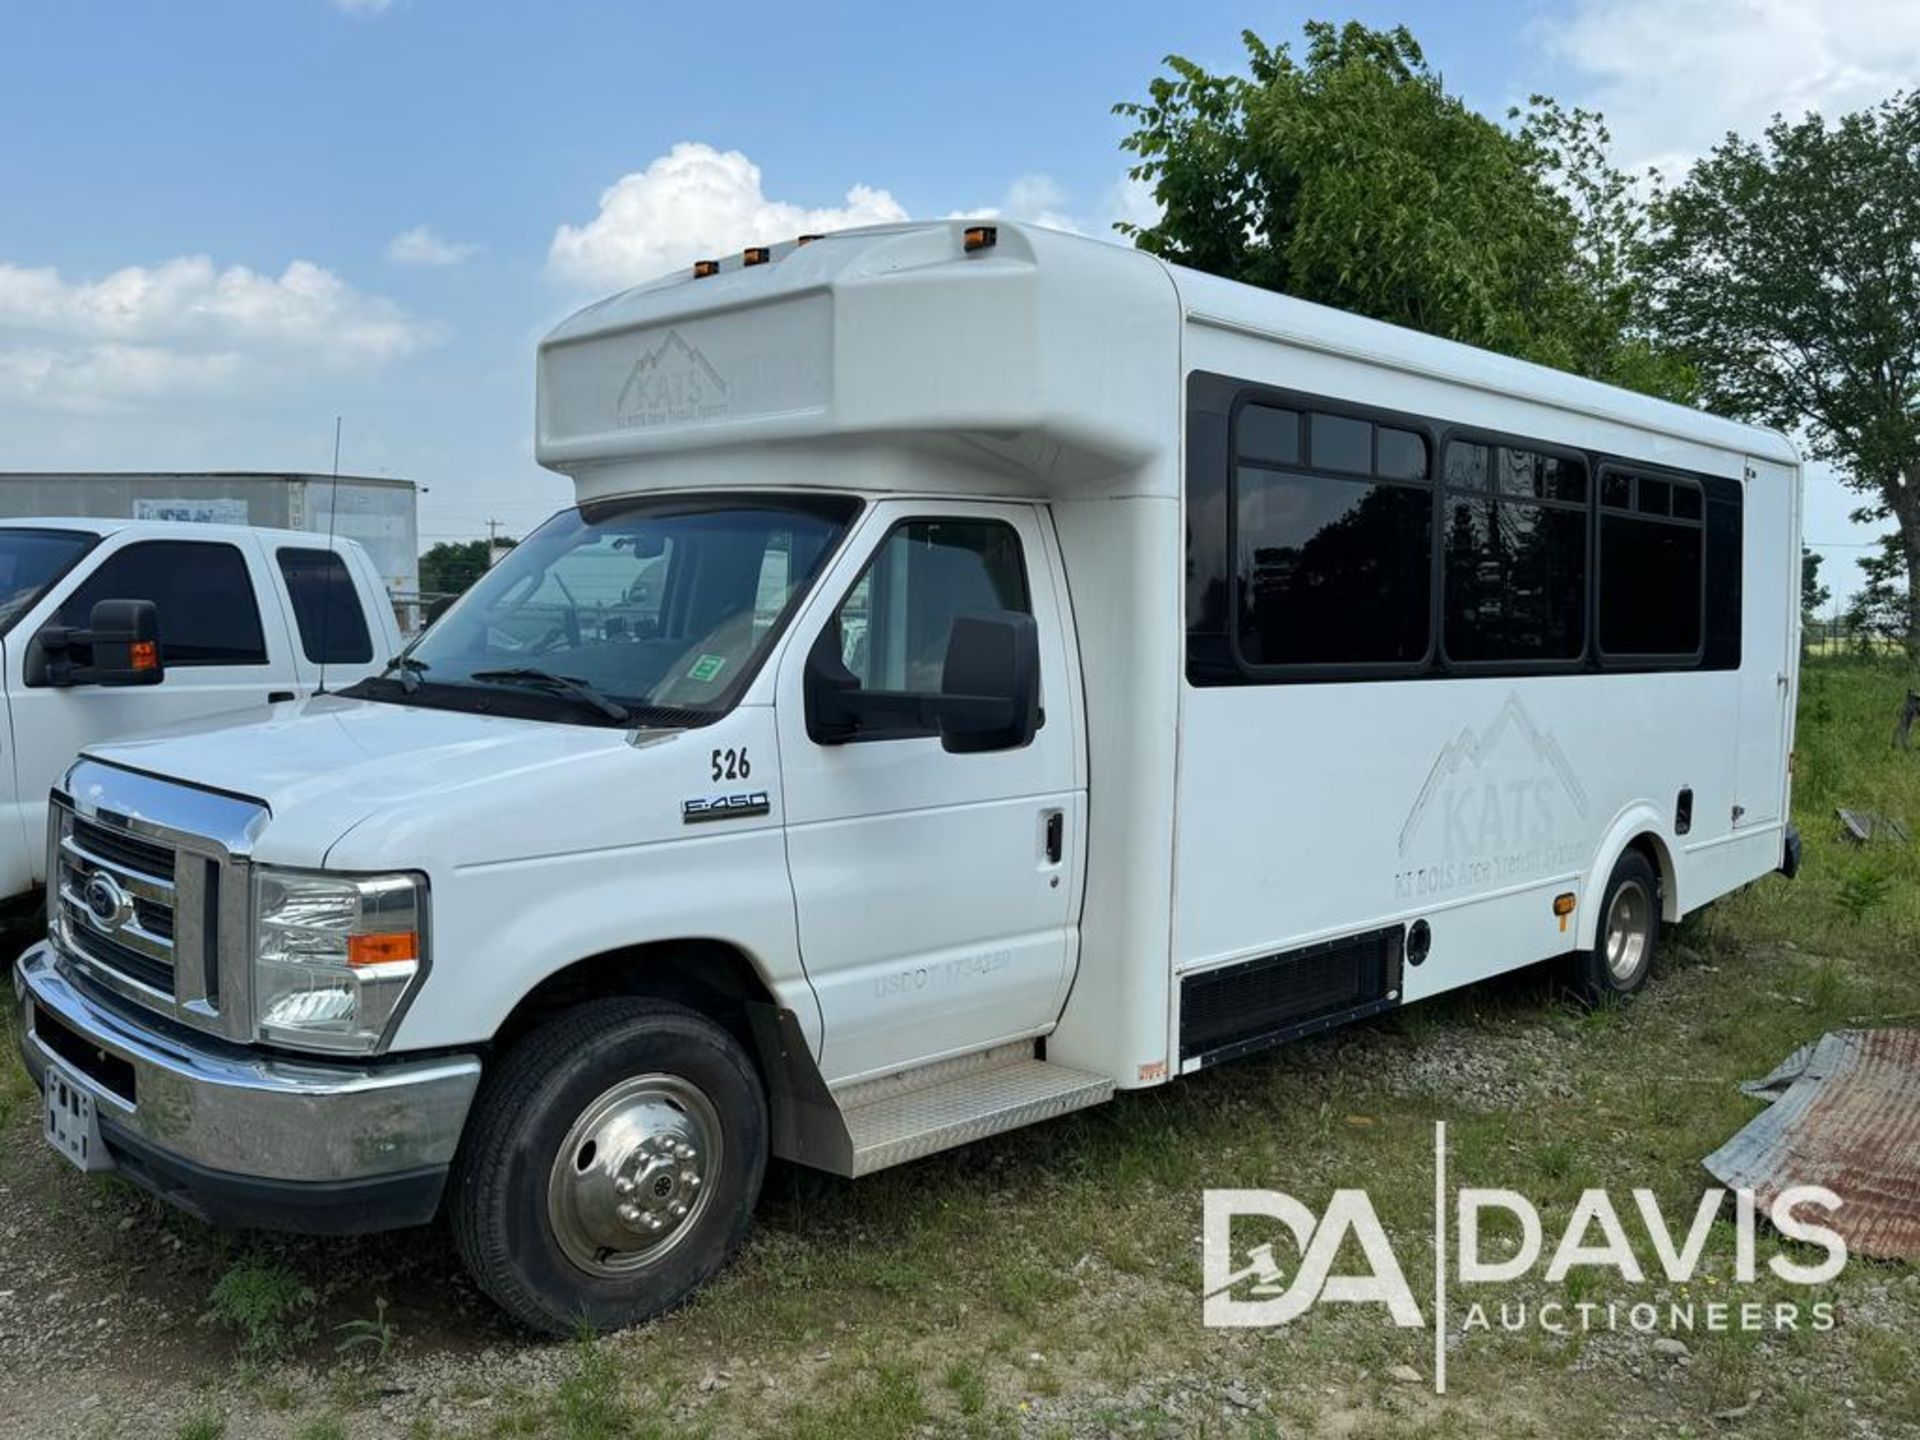 2016 Ford E-450 Bus, CNG truck - Image 2 of 11